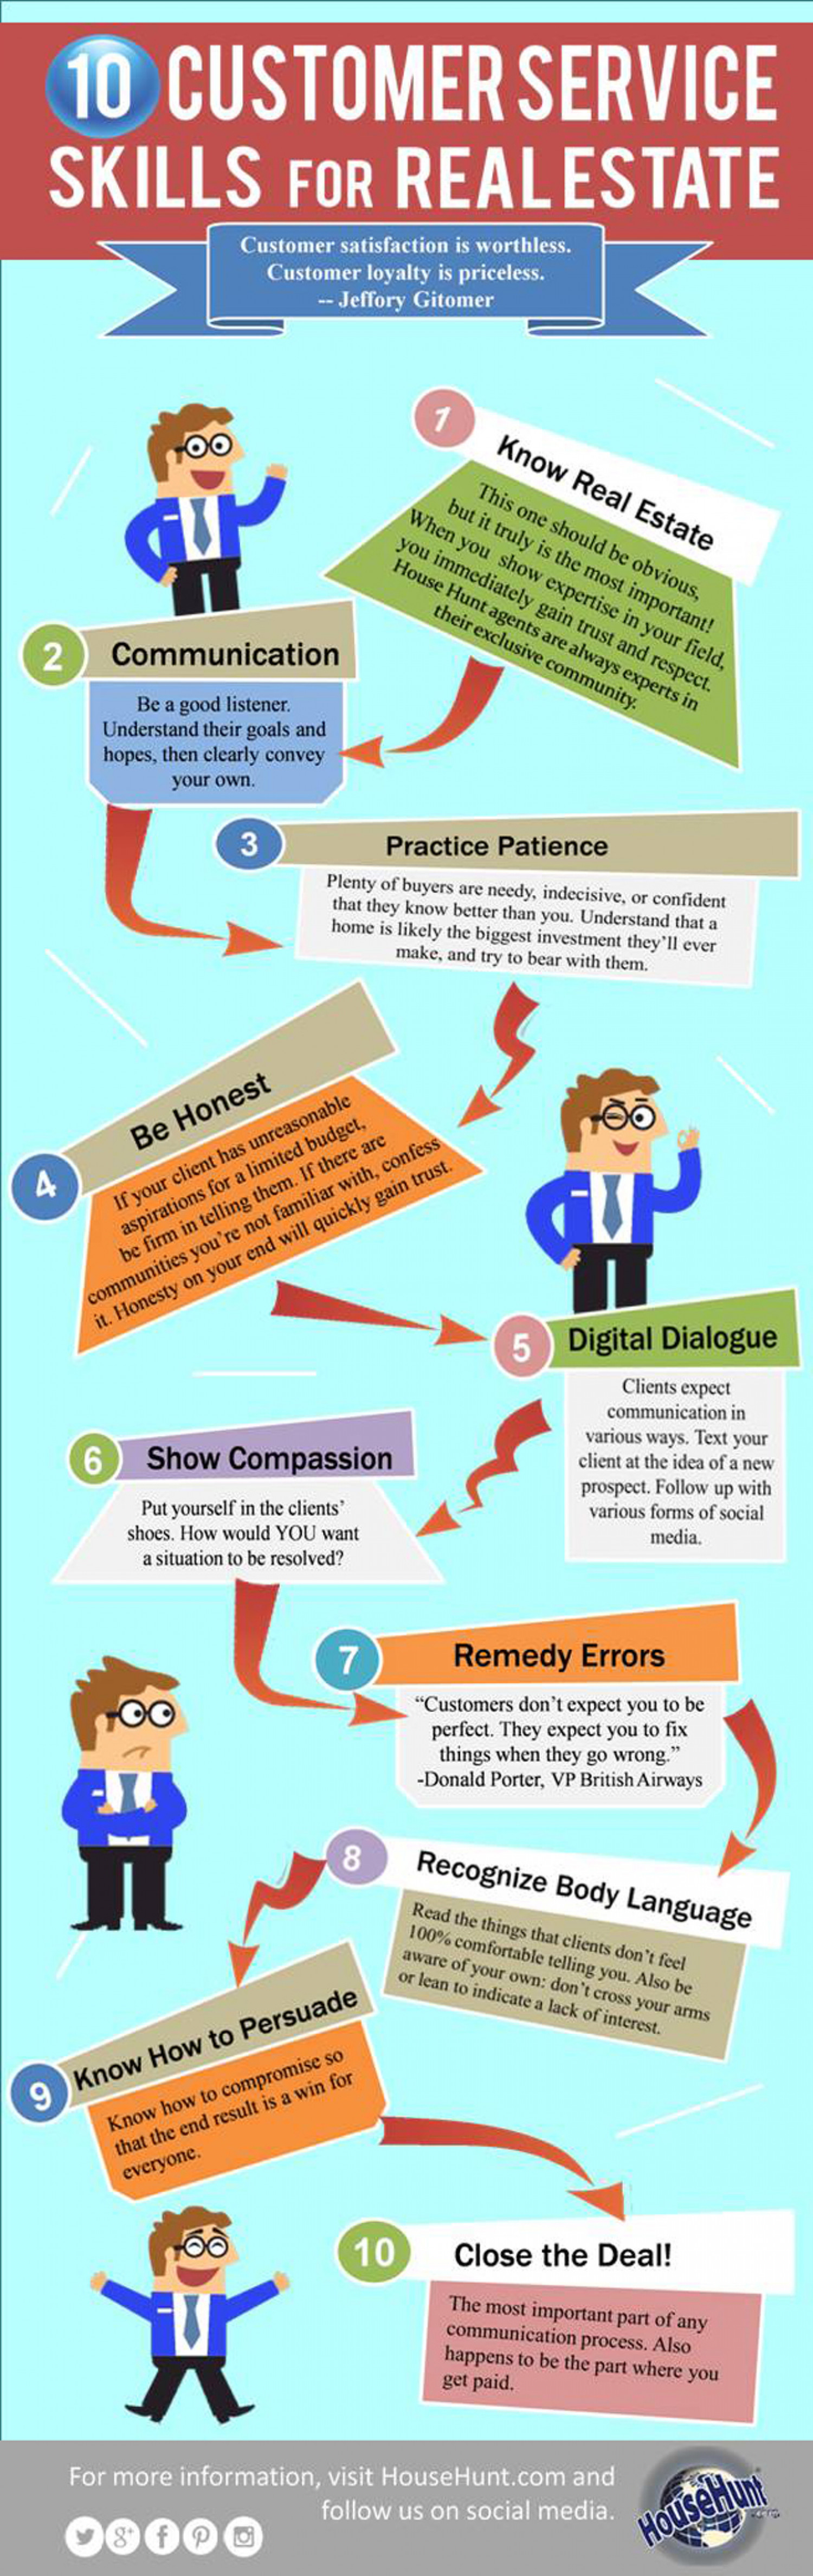 10 Customer Service Skills for Realestate Infographic